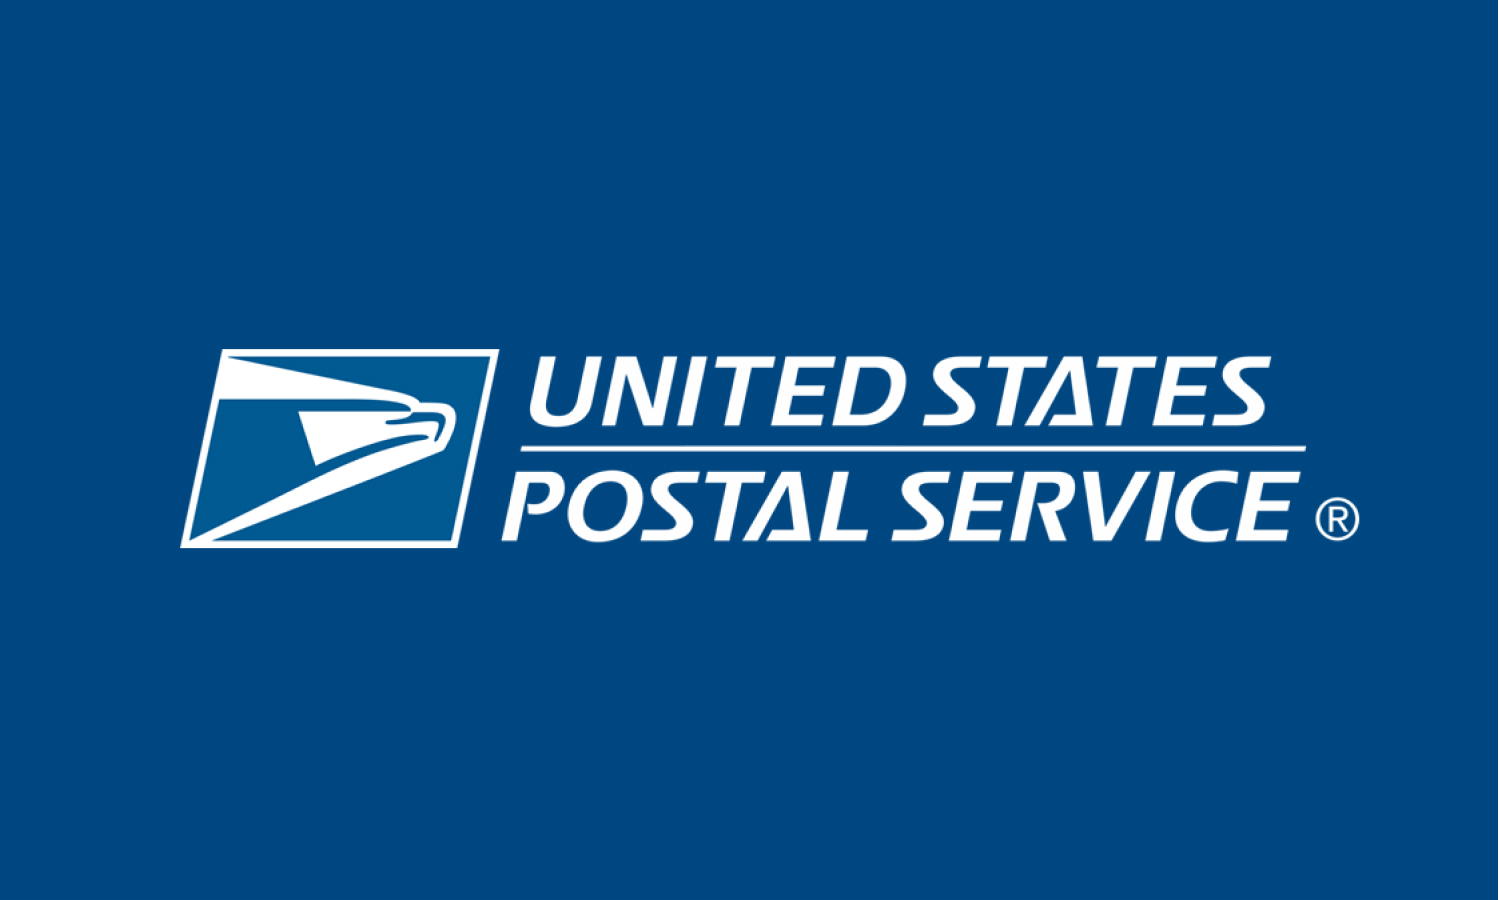 USPS logo in white on a blue background.